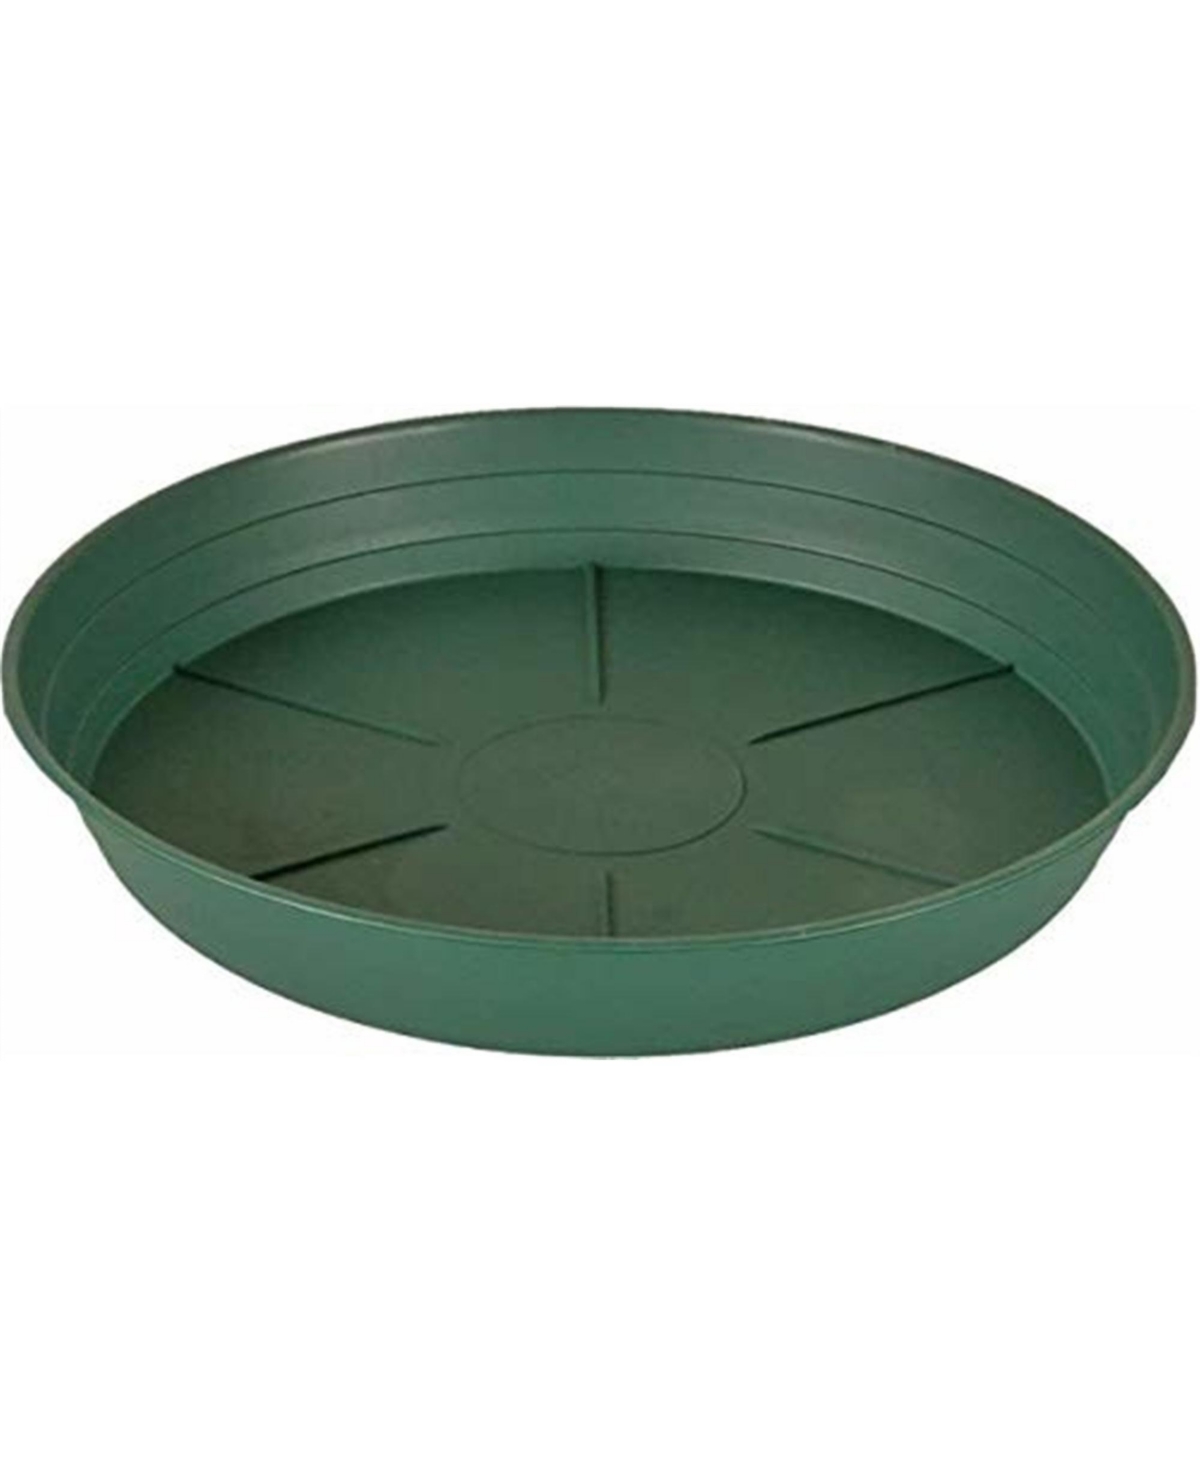 HYFHGS8P Premium Saucer Round Green, 8in Pack of 1 - Green